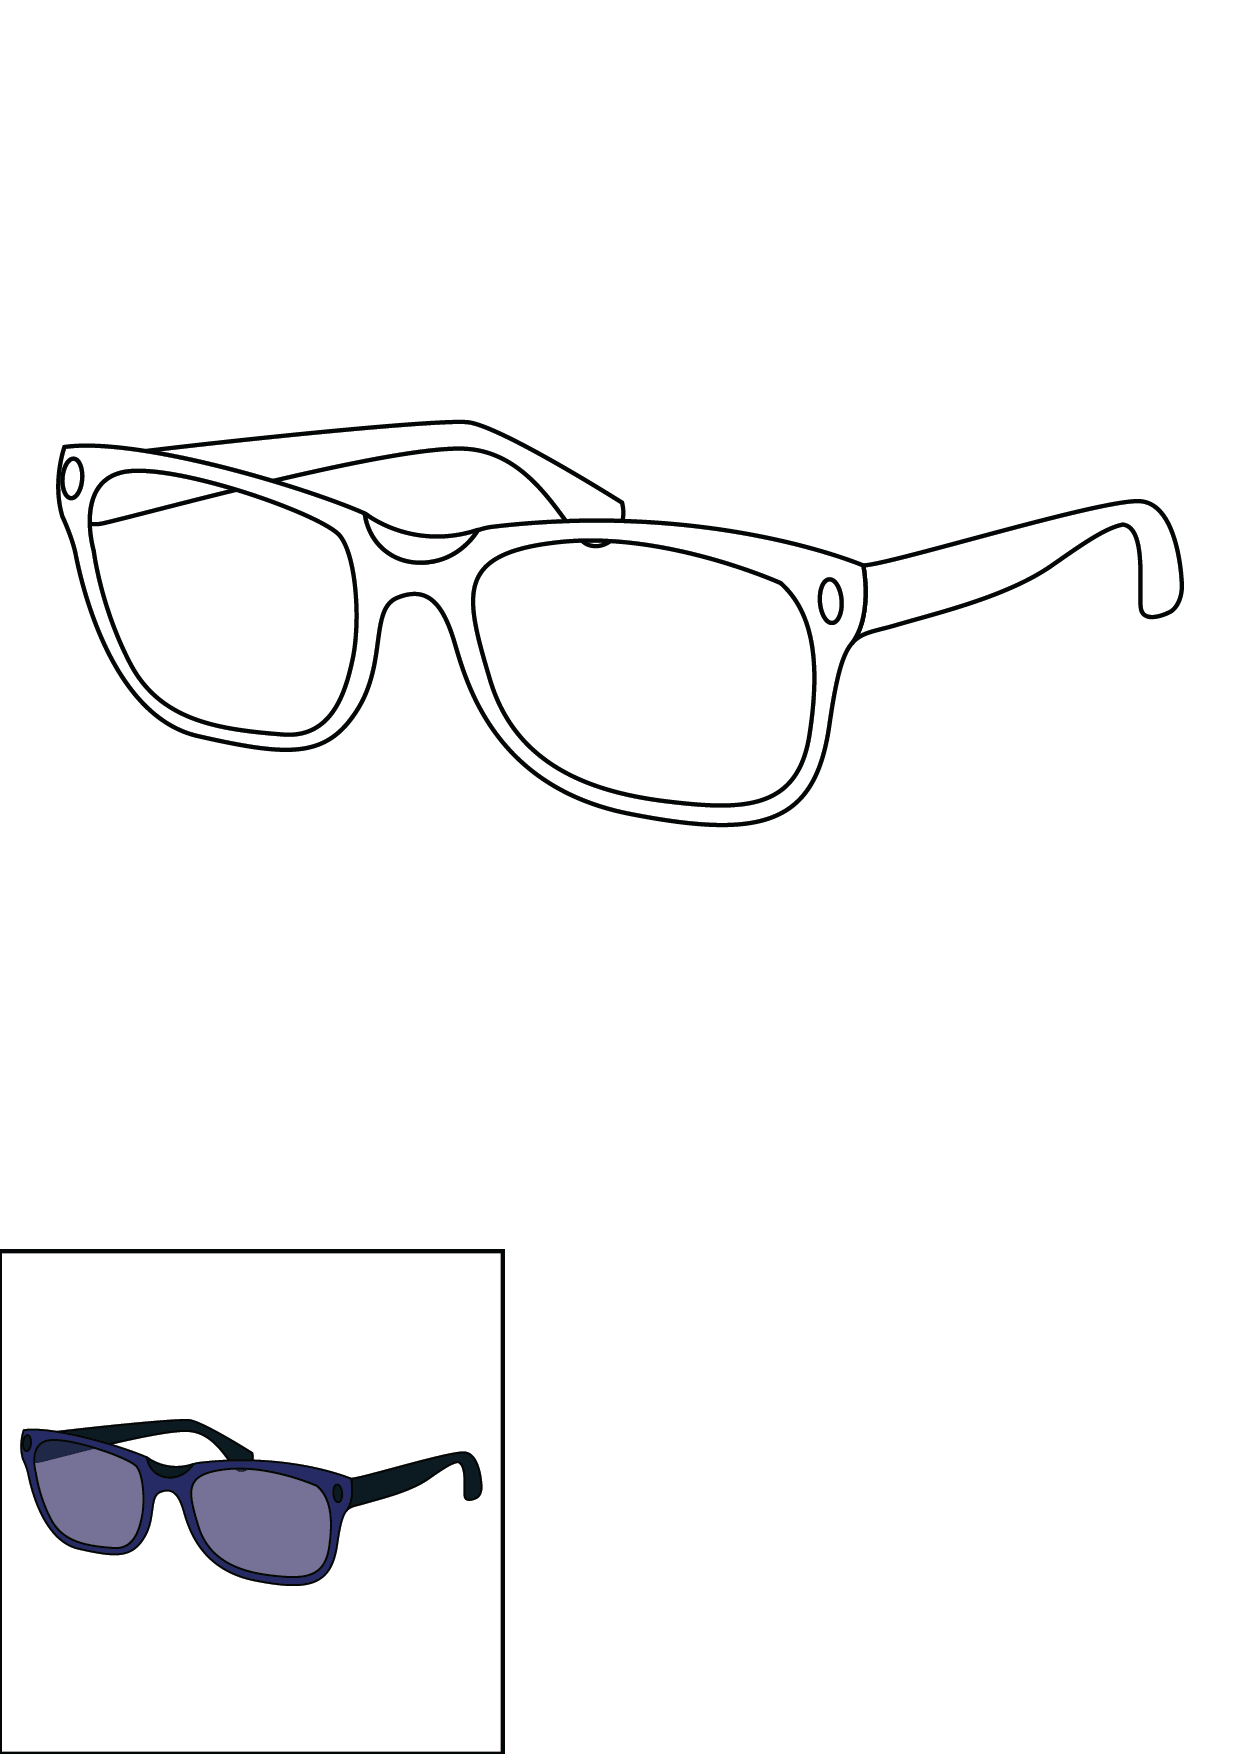 How to Draw Glasses Step by Step Printable Color